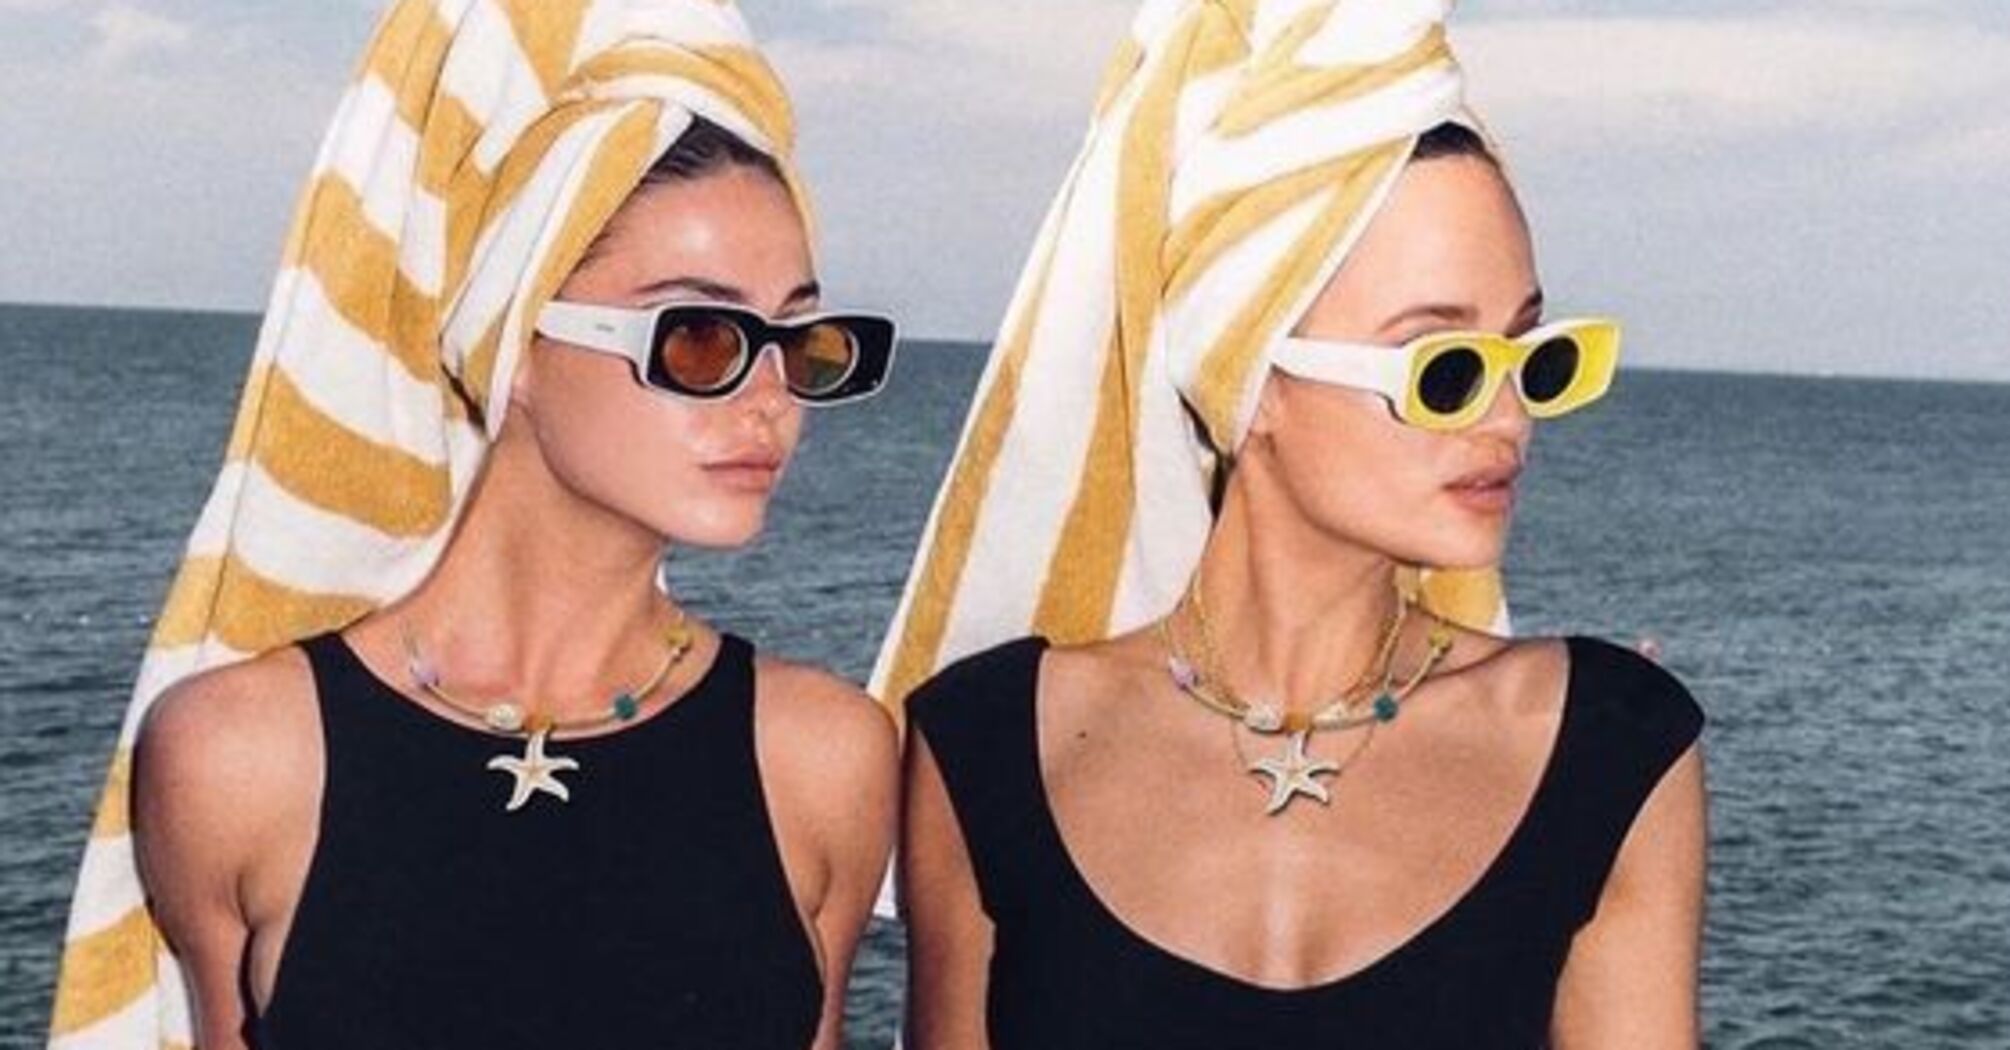 Stylish and elegant: 7 trendy swimsuits to wear this summer